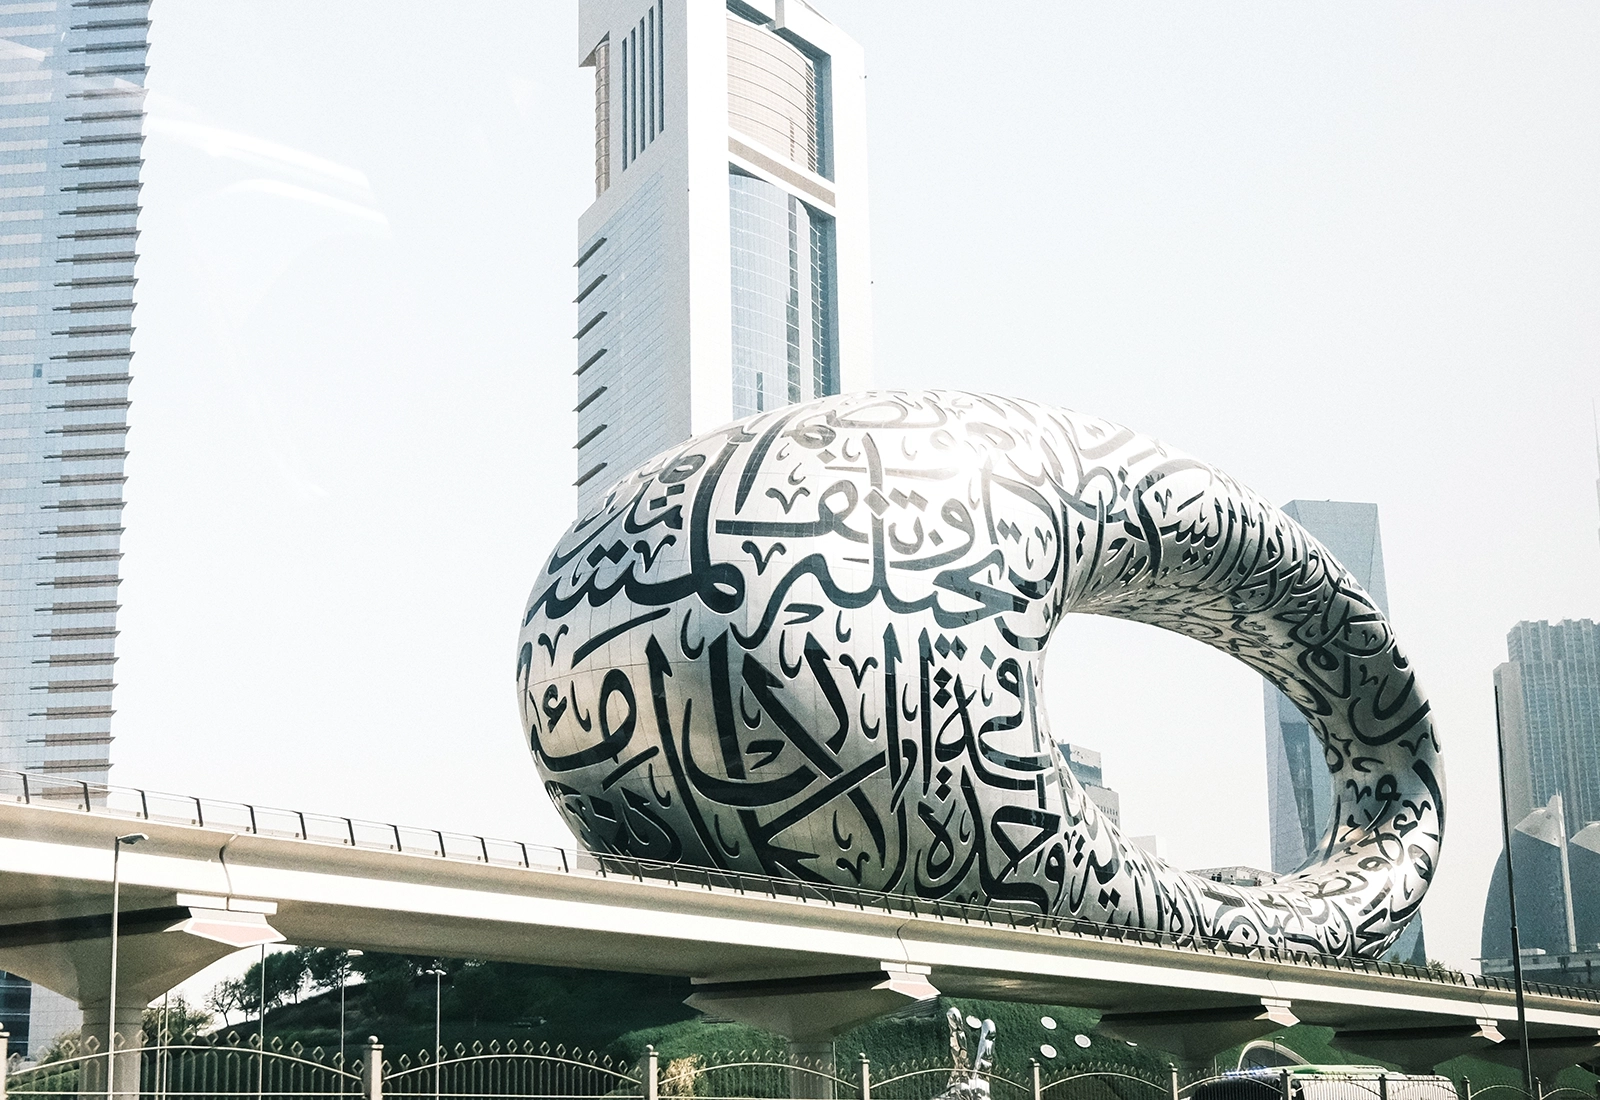 Best museums in Dubai that are worth your time